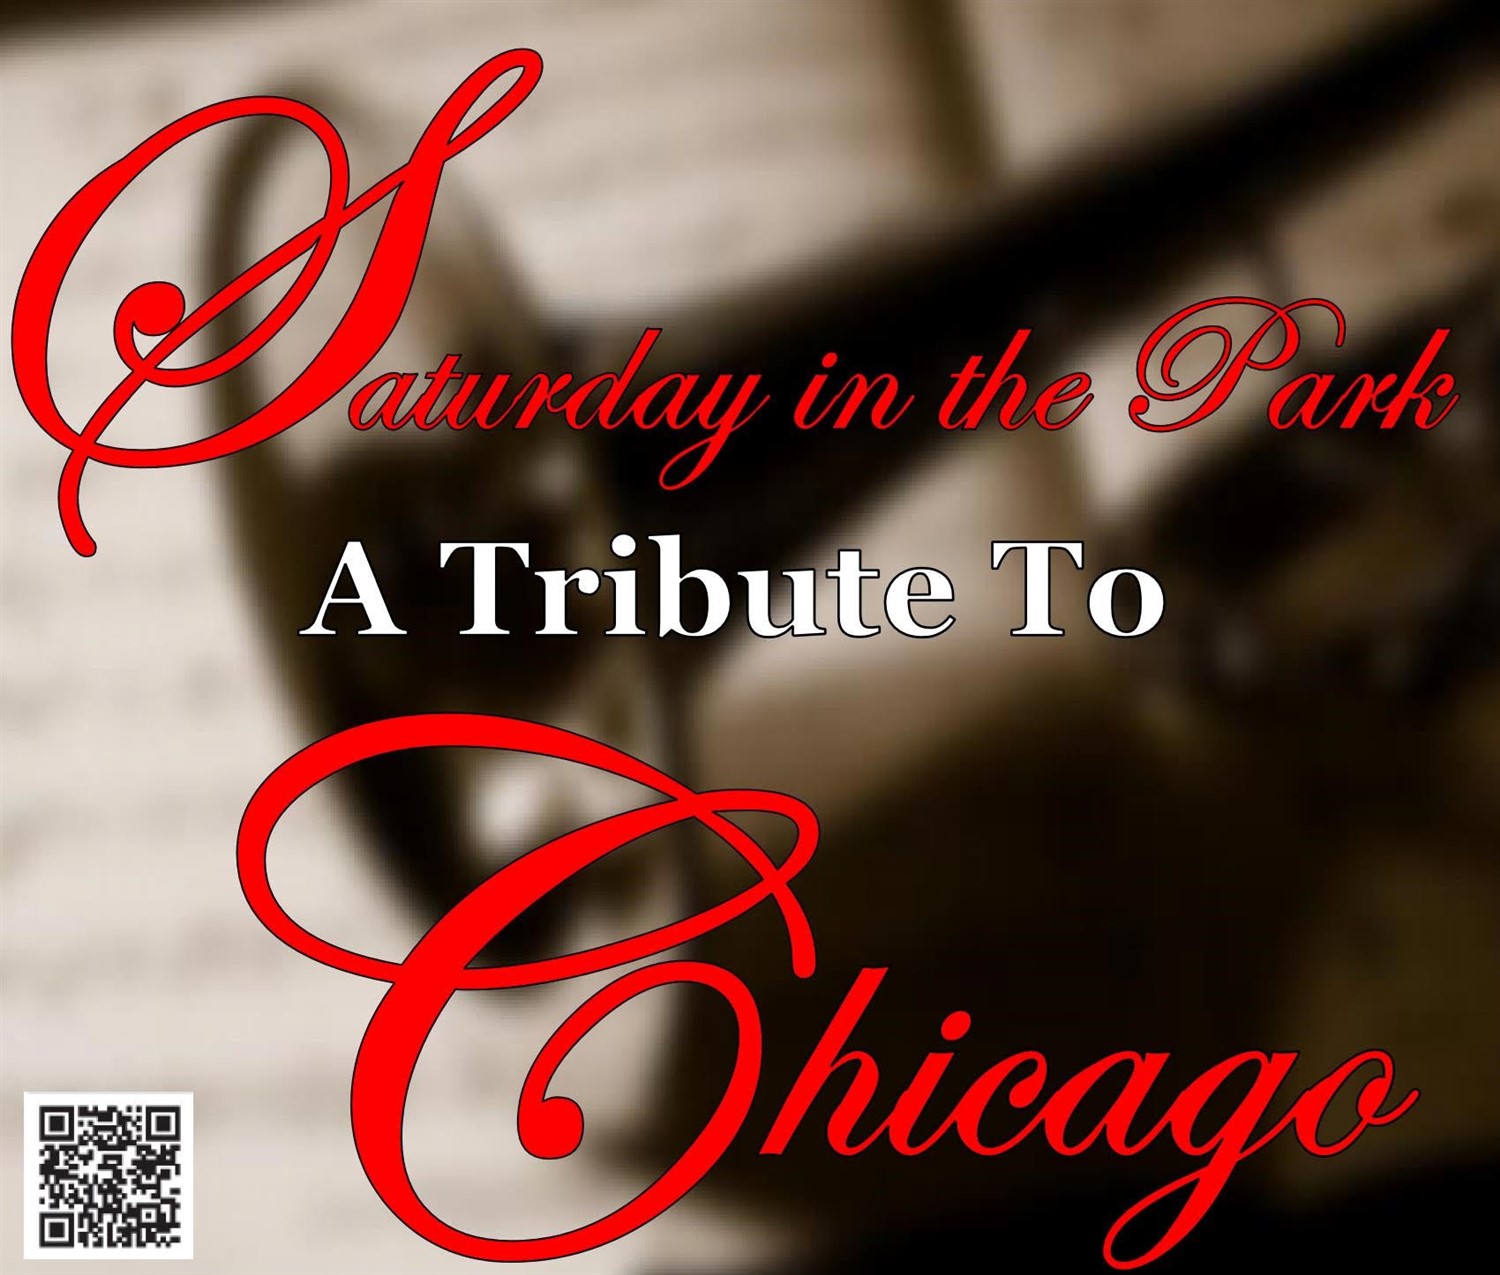 A TRIBUTE TO CHICAGO  on Dec 17, 00:00@Nashville Roadhouse Theater at the Branson Star - Pick a seat, Buy tickets and Get information on nashvilleroadhouse.com bransonstartheater